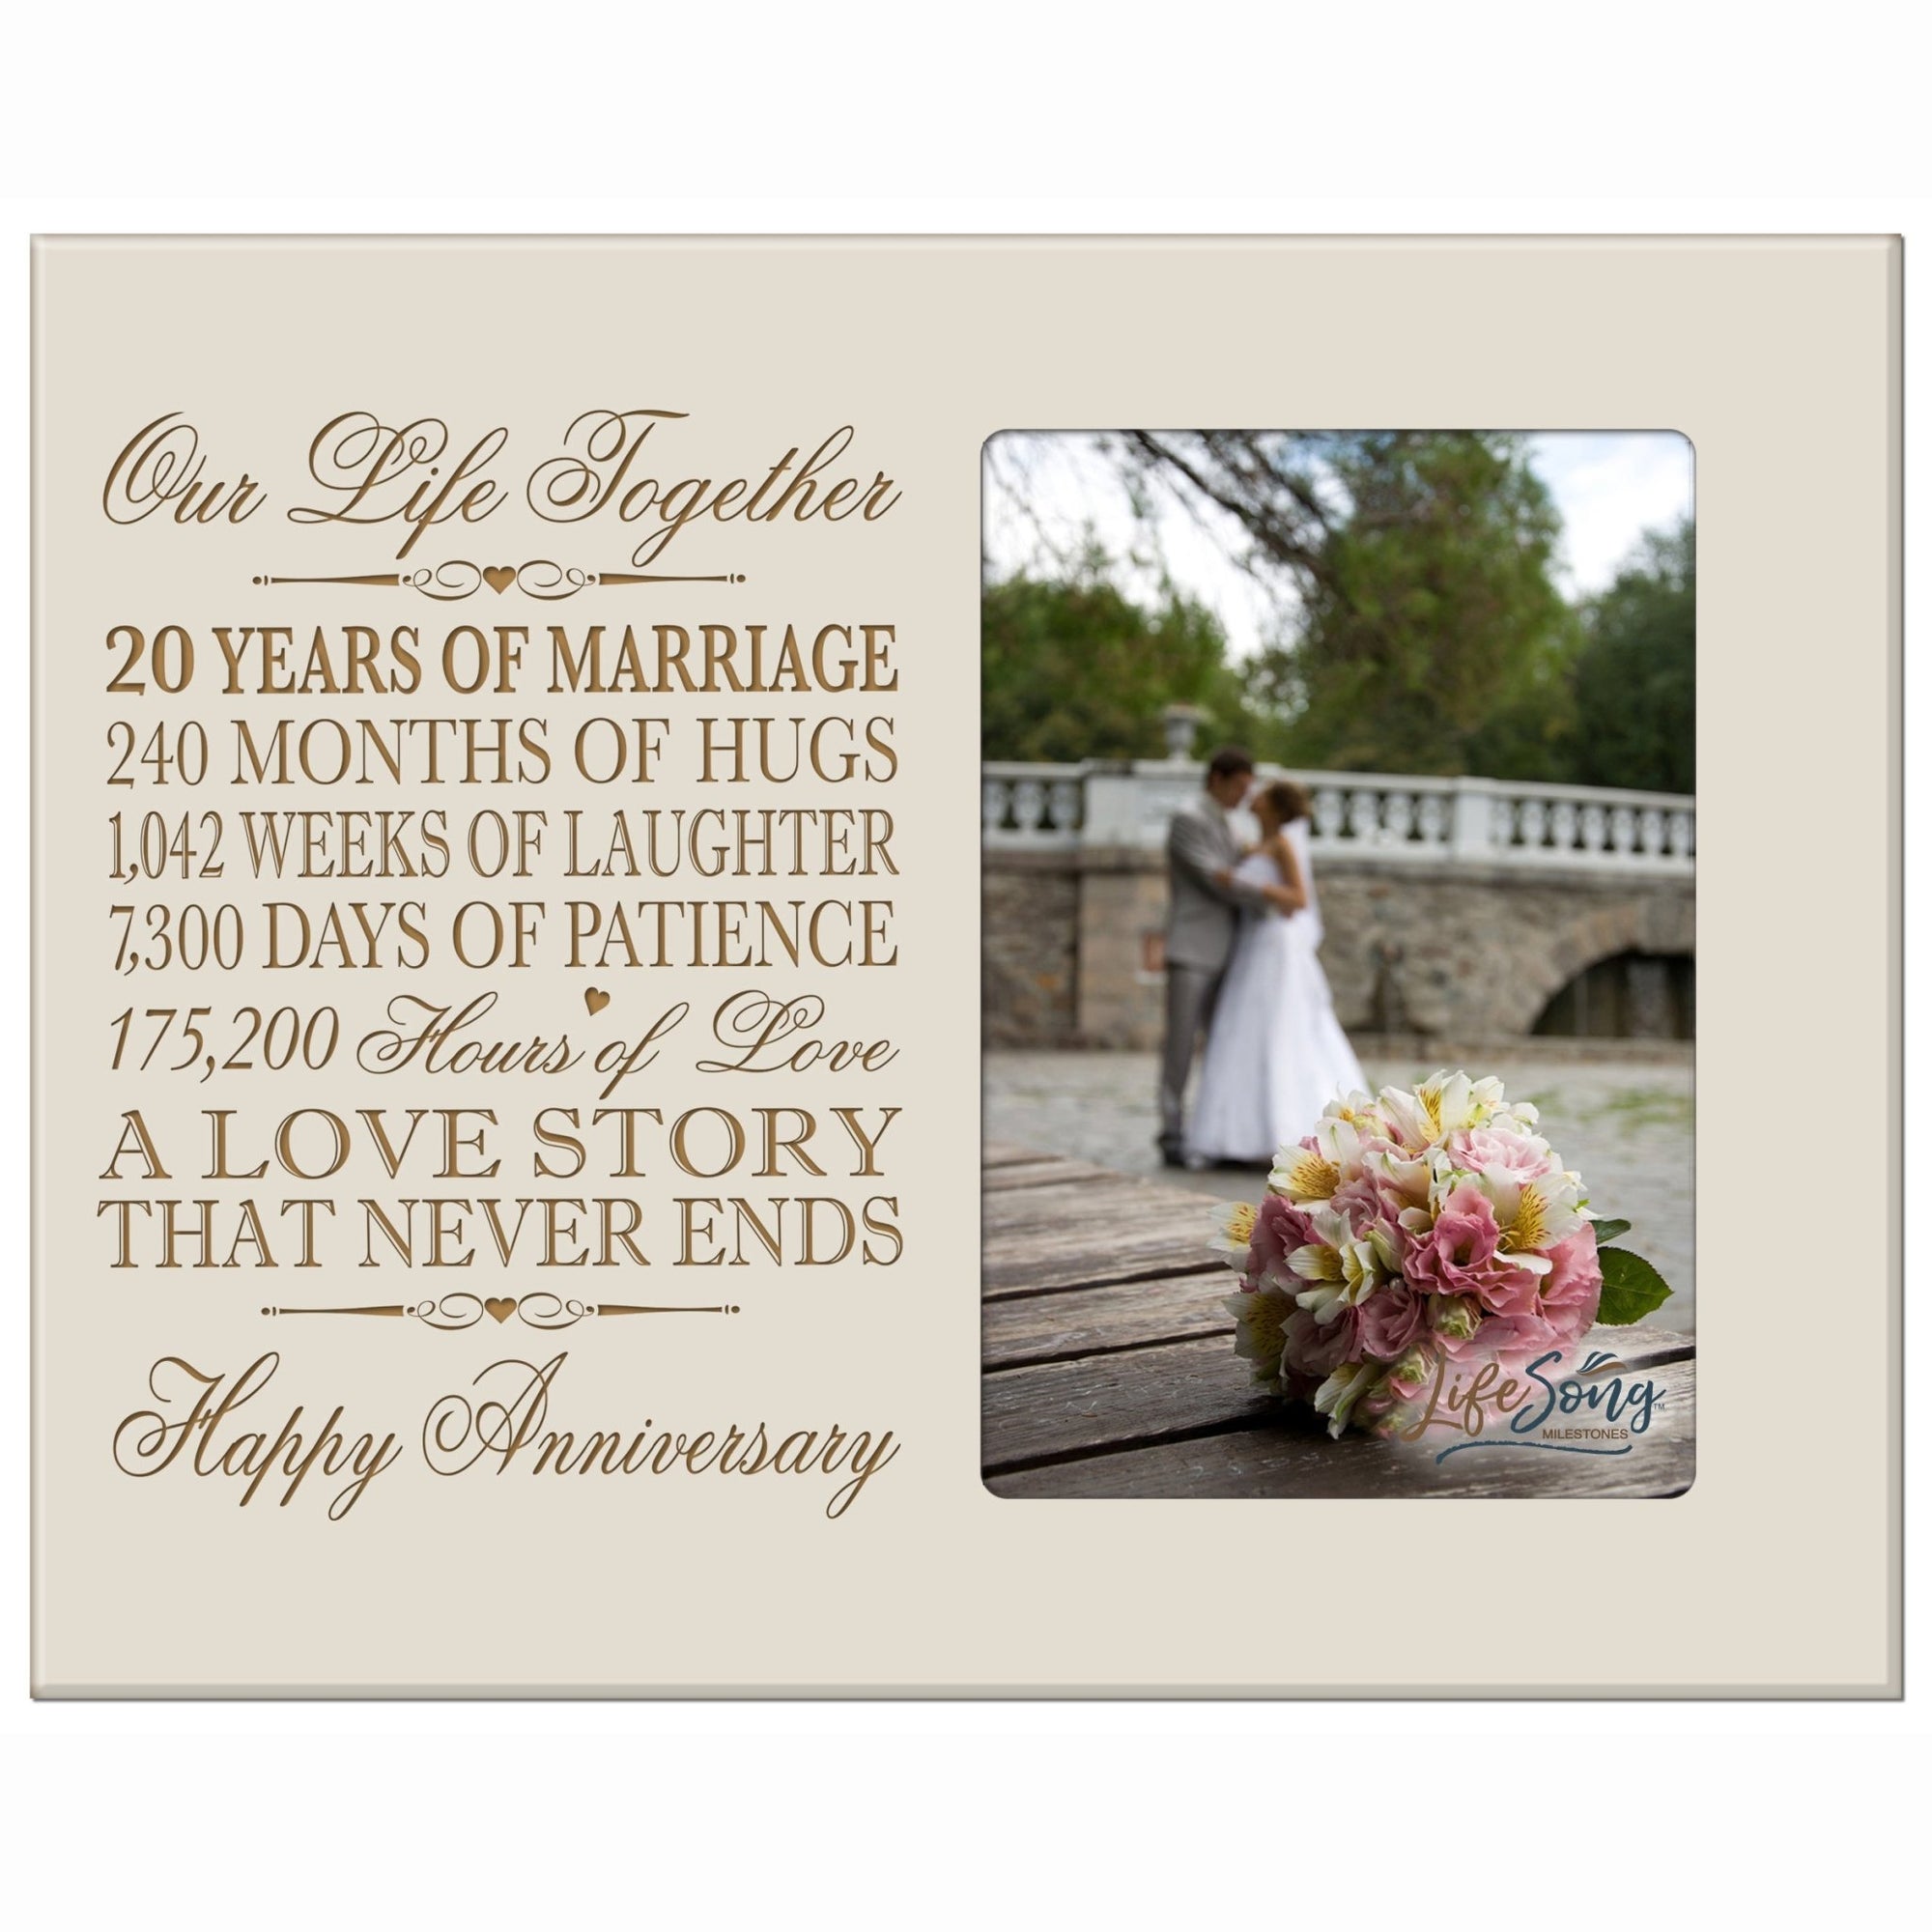 Personalized Picture Frame 20th Wedding Anniversary Gift Ideas